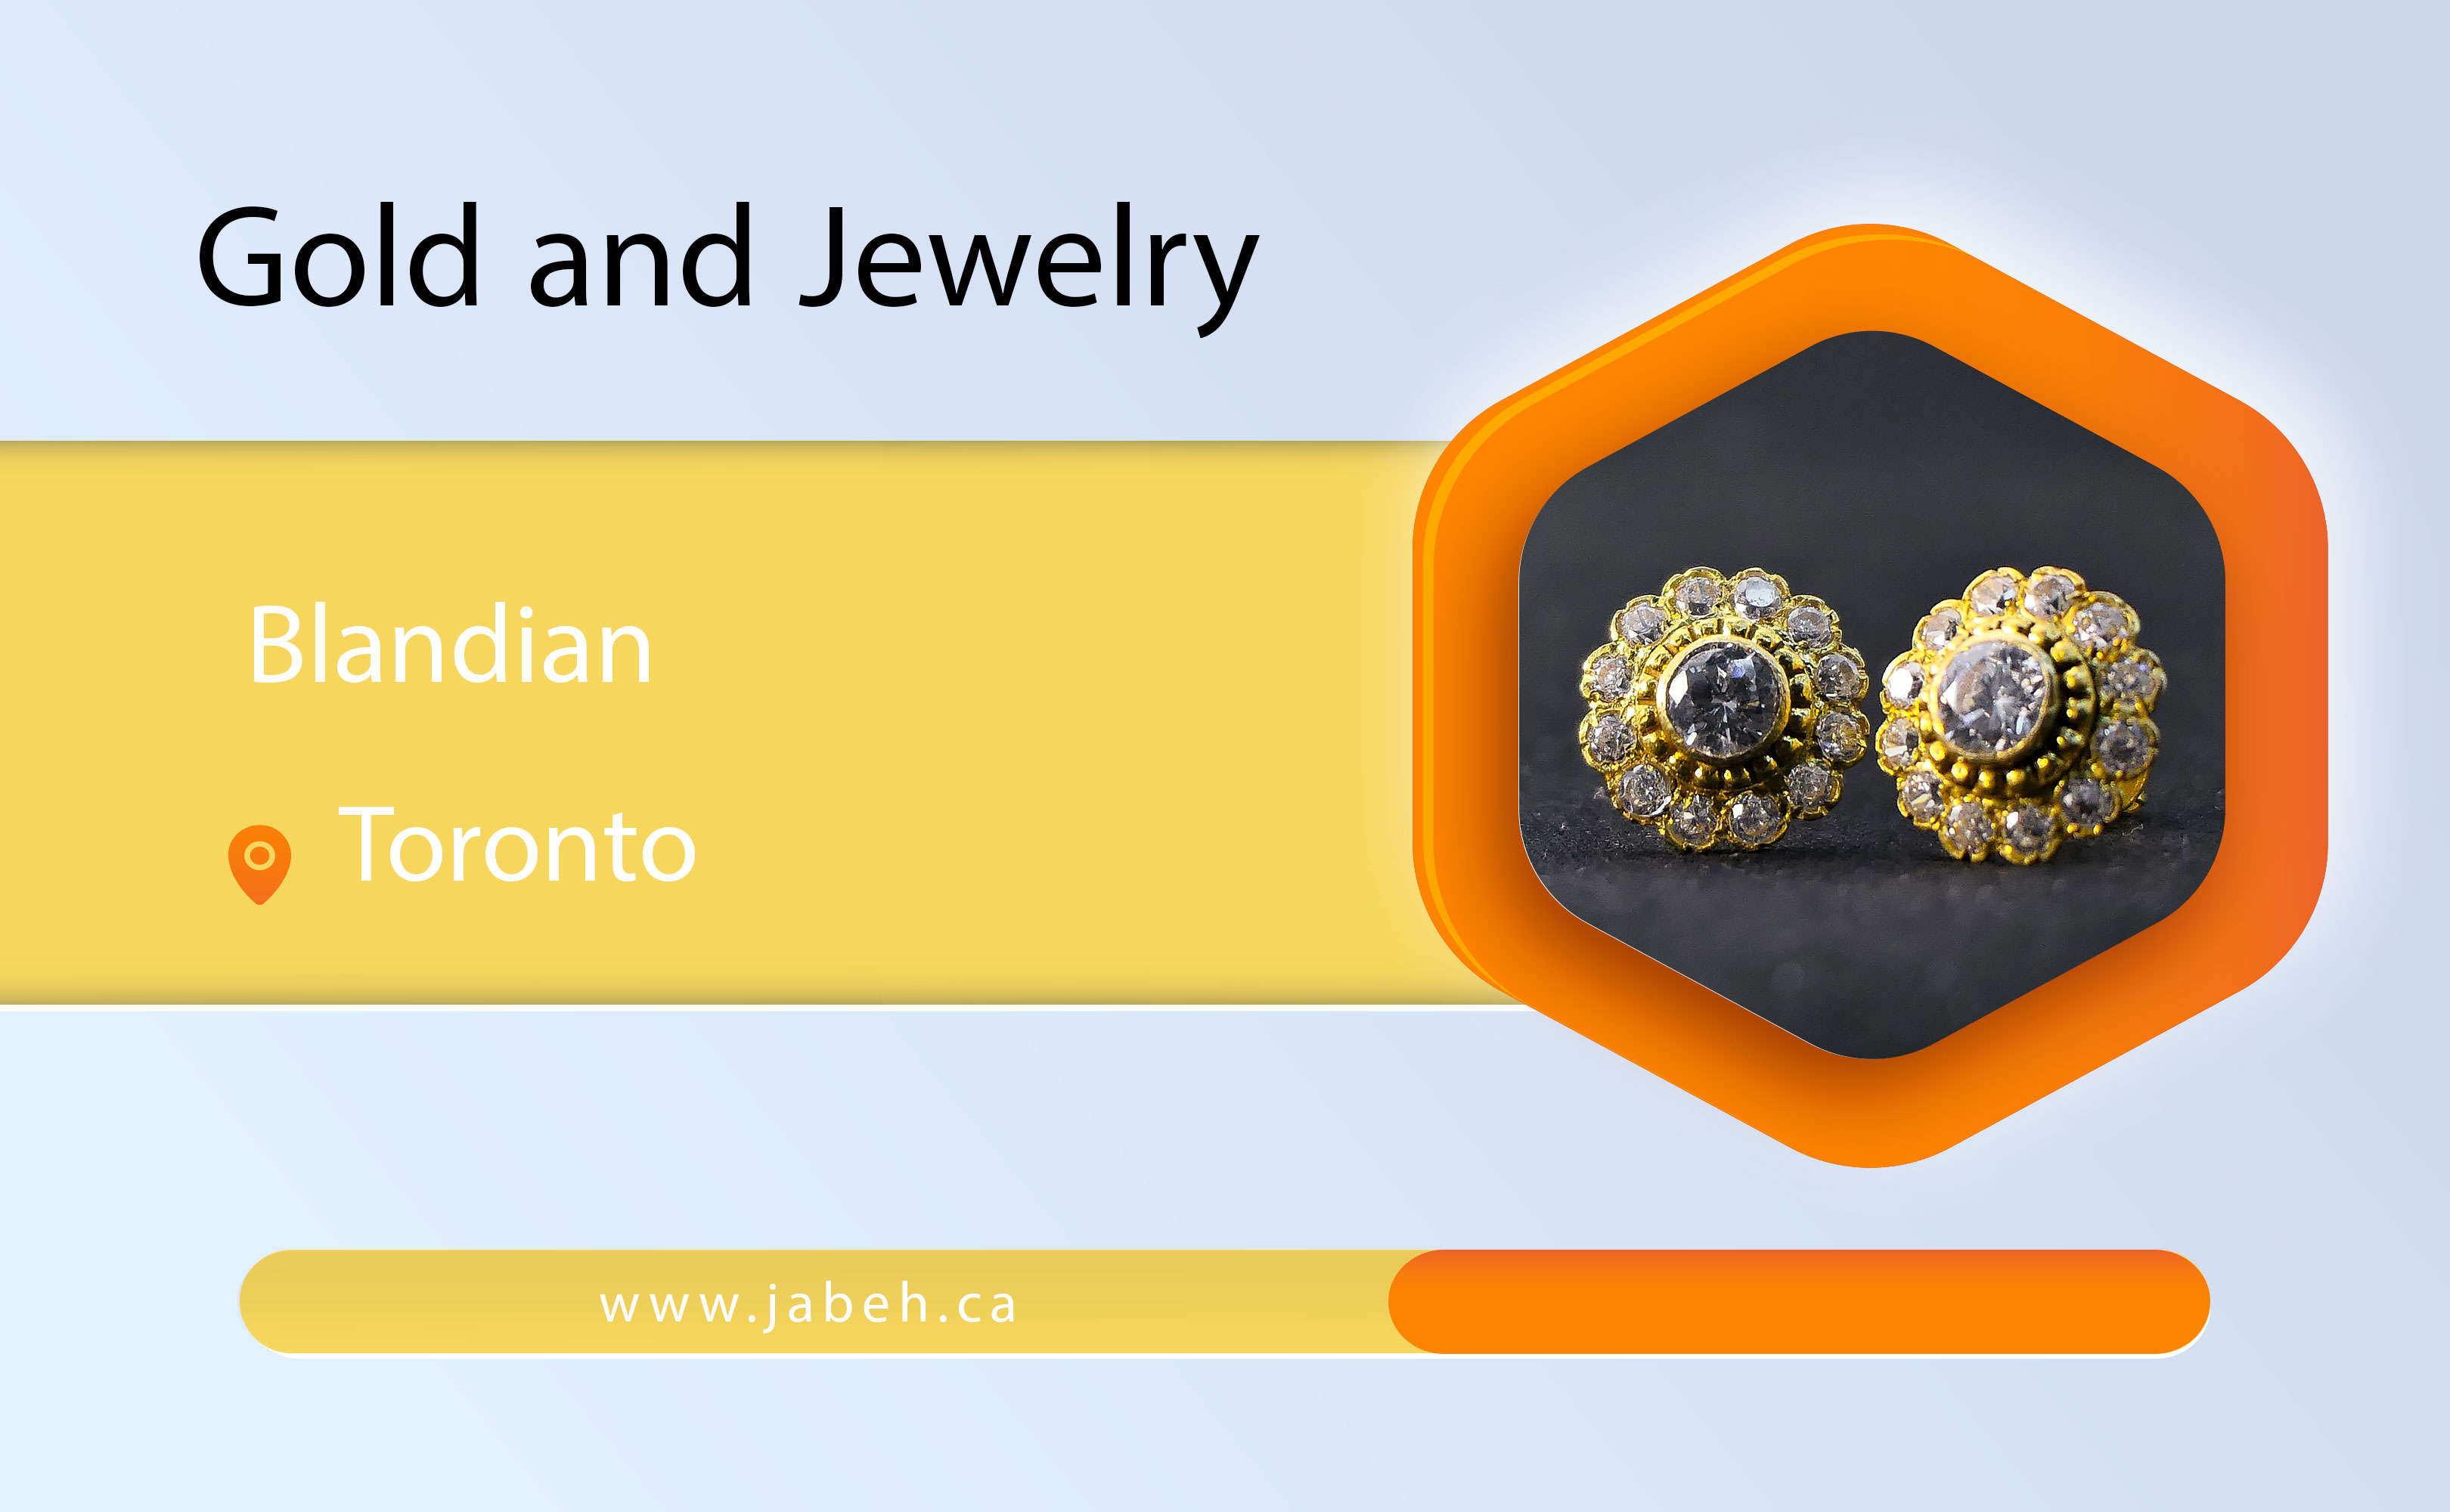 Blandian gold and jewelry in Toronto